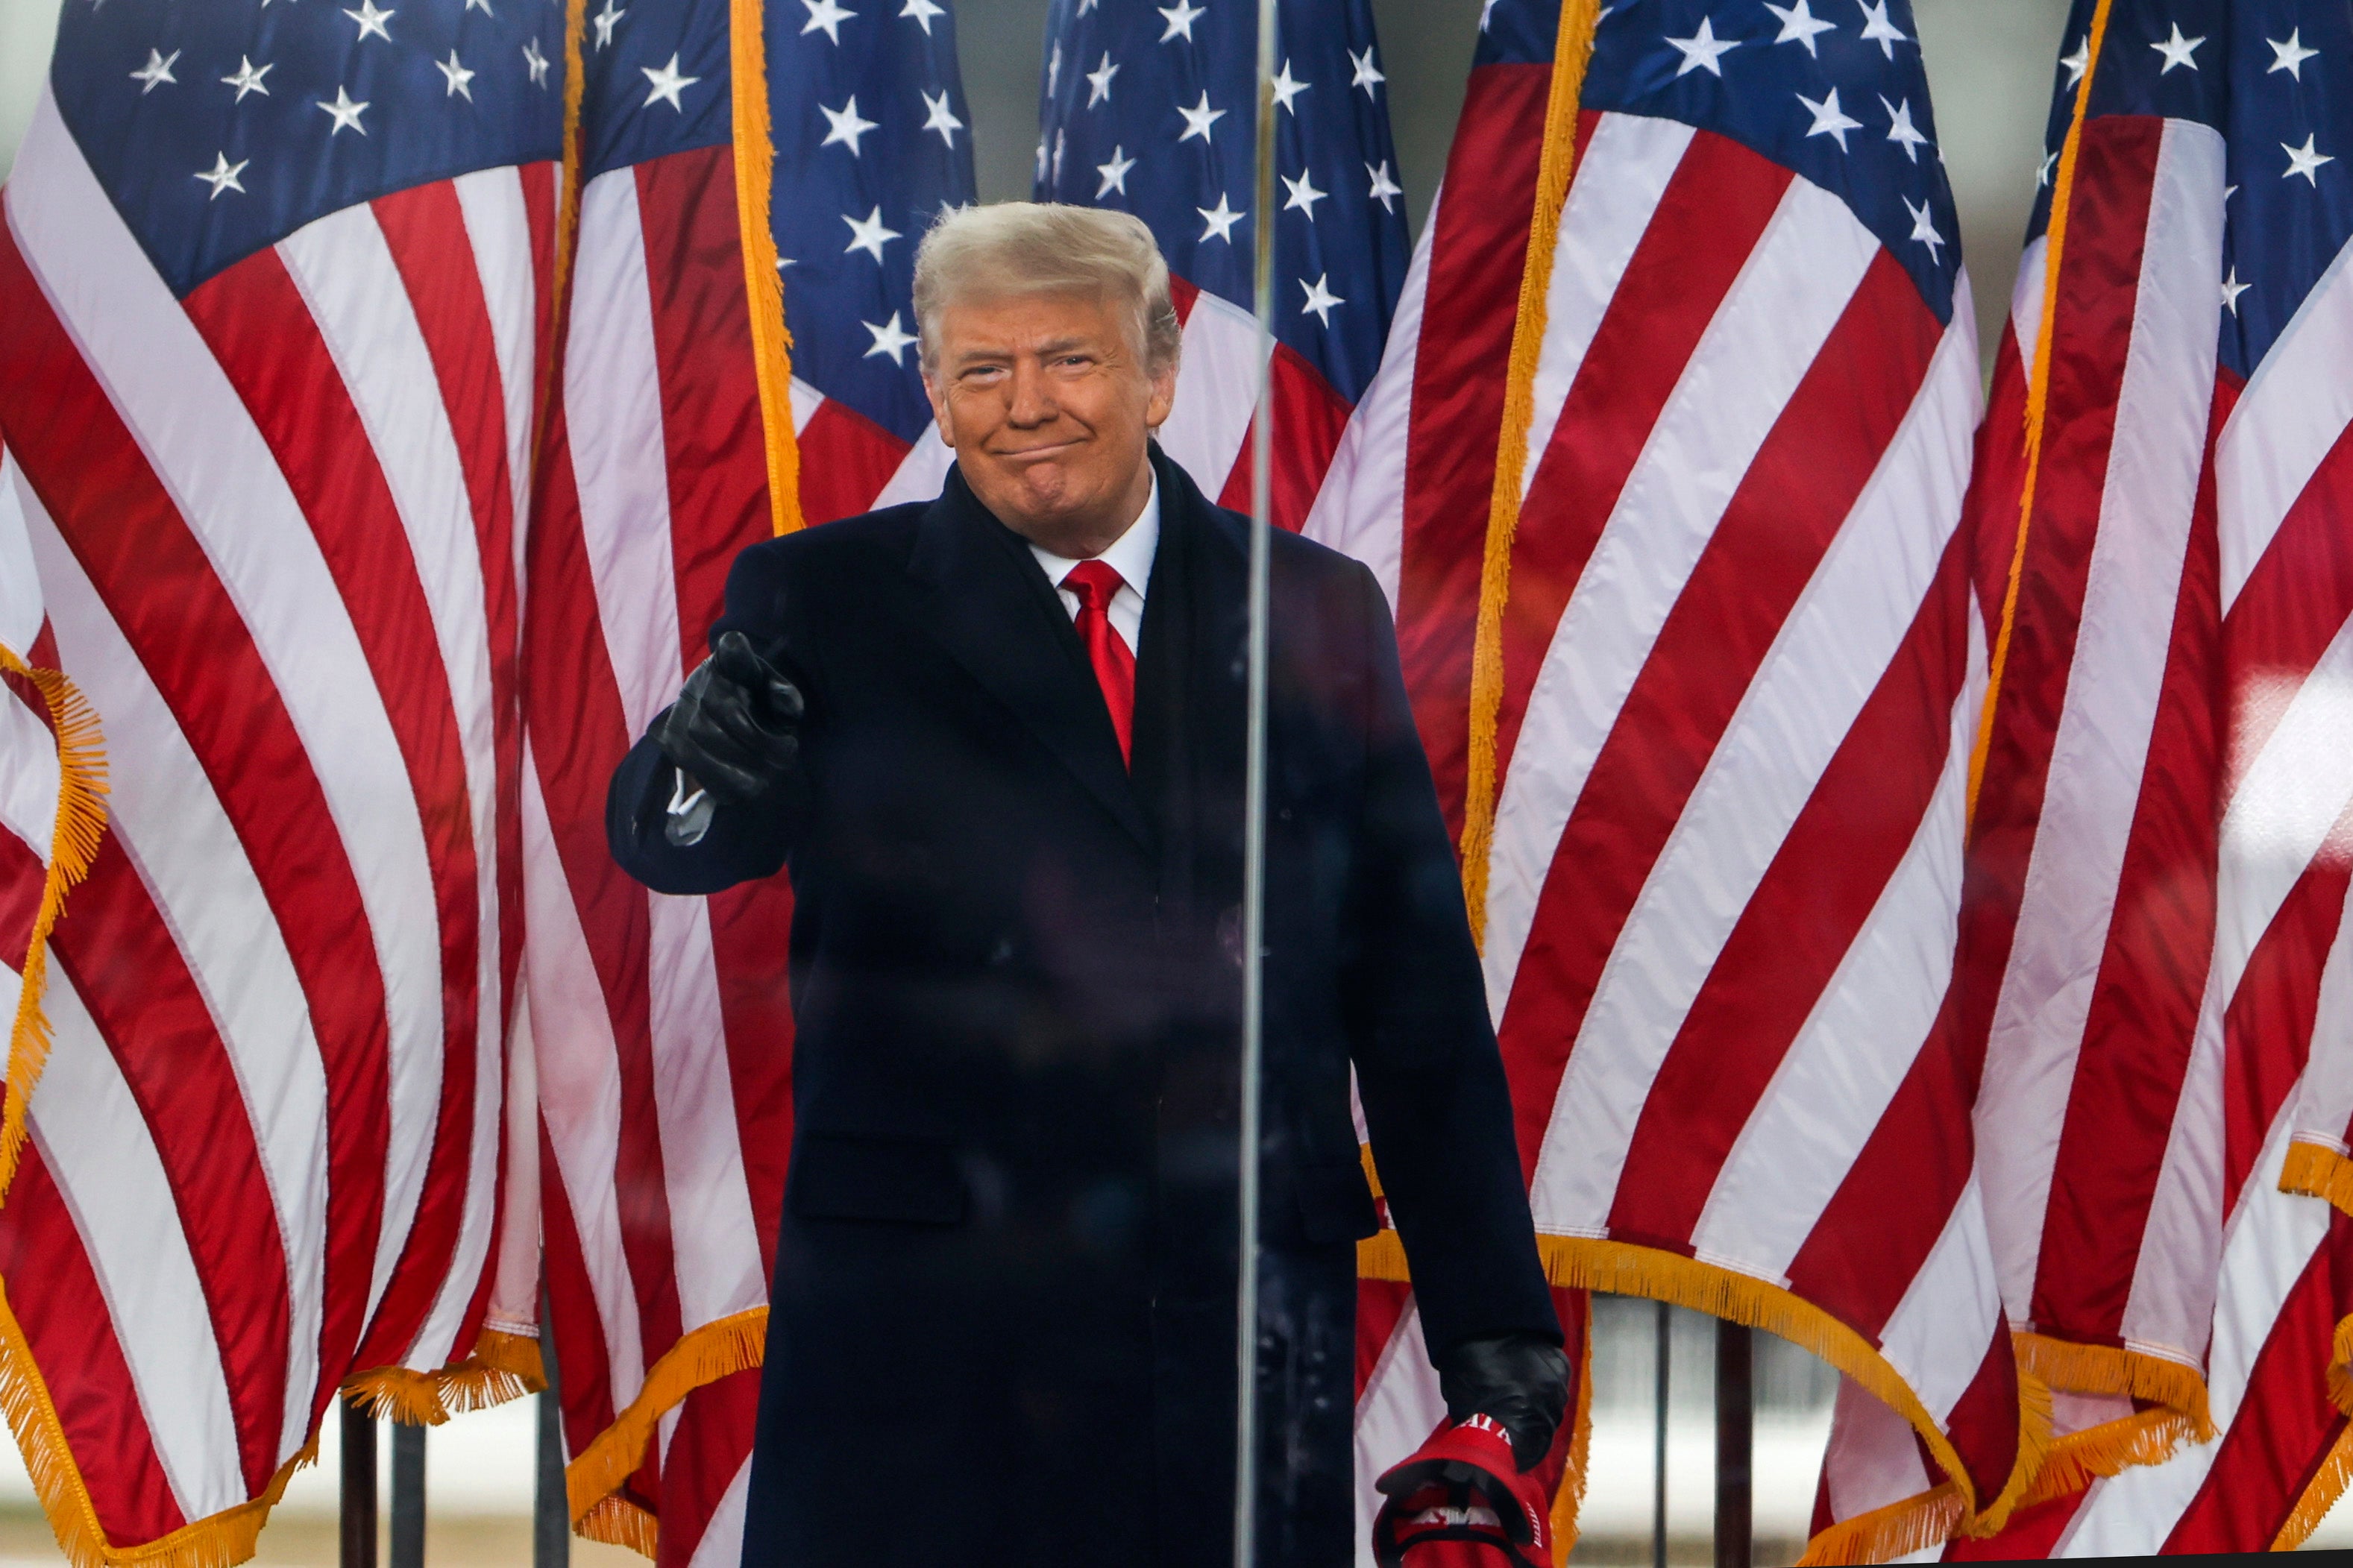 President Donald Trump arrives at the "Stop The Steal" Rally on January 06, 2021 in Washington, DC.